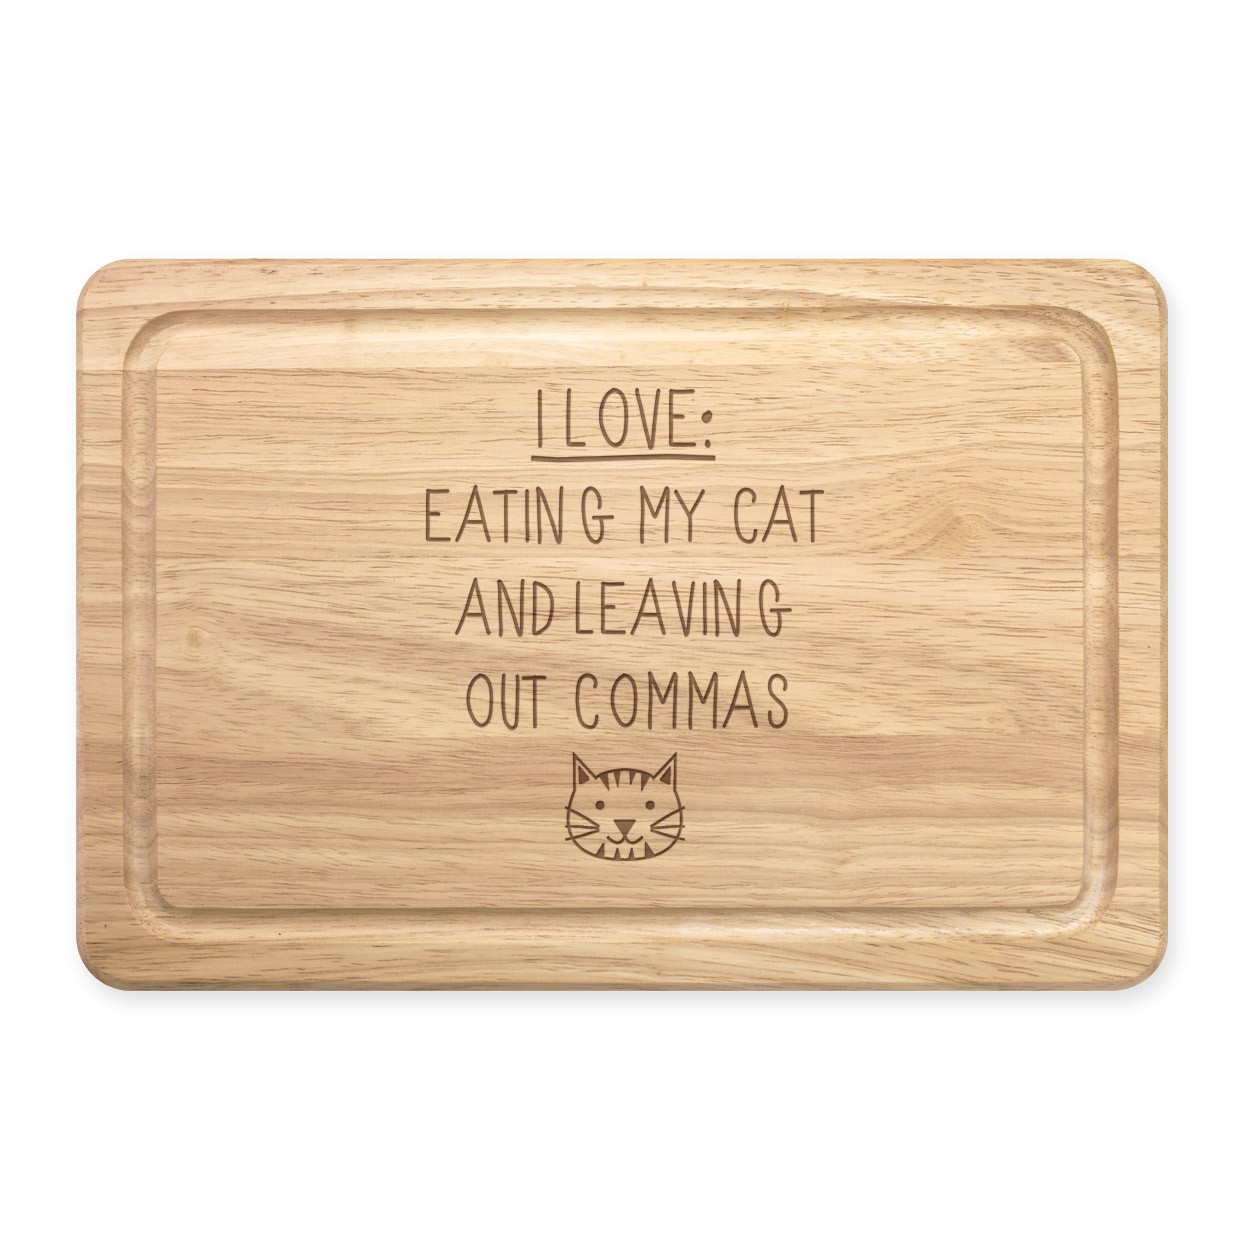 I Love Eating My Cat and Leaving Out Commas Rectangular Wooden Chopping Board